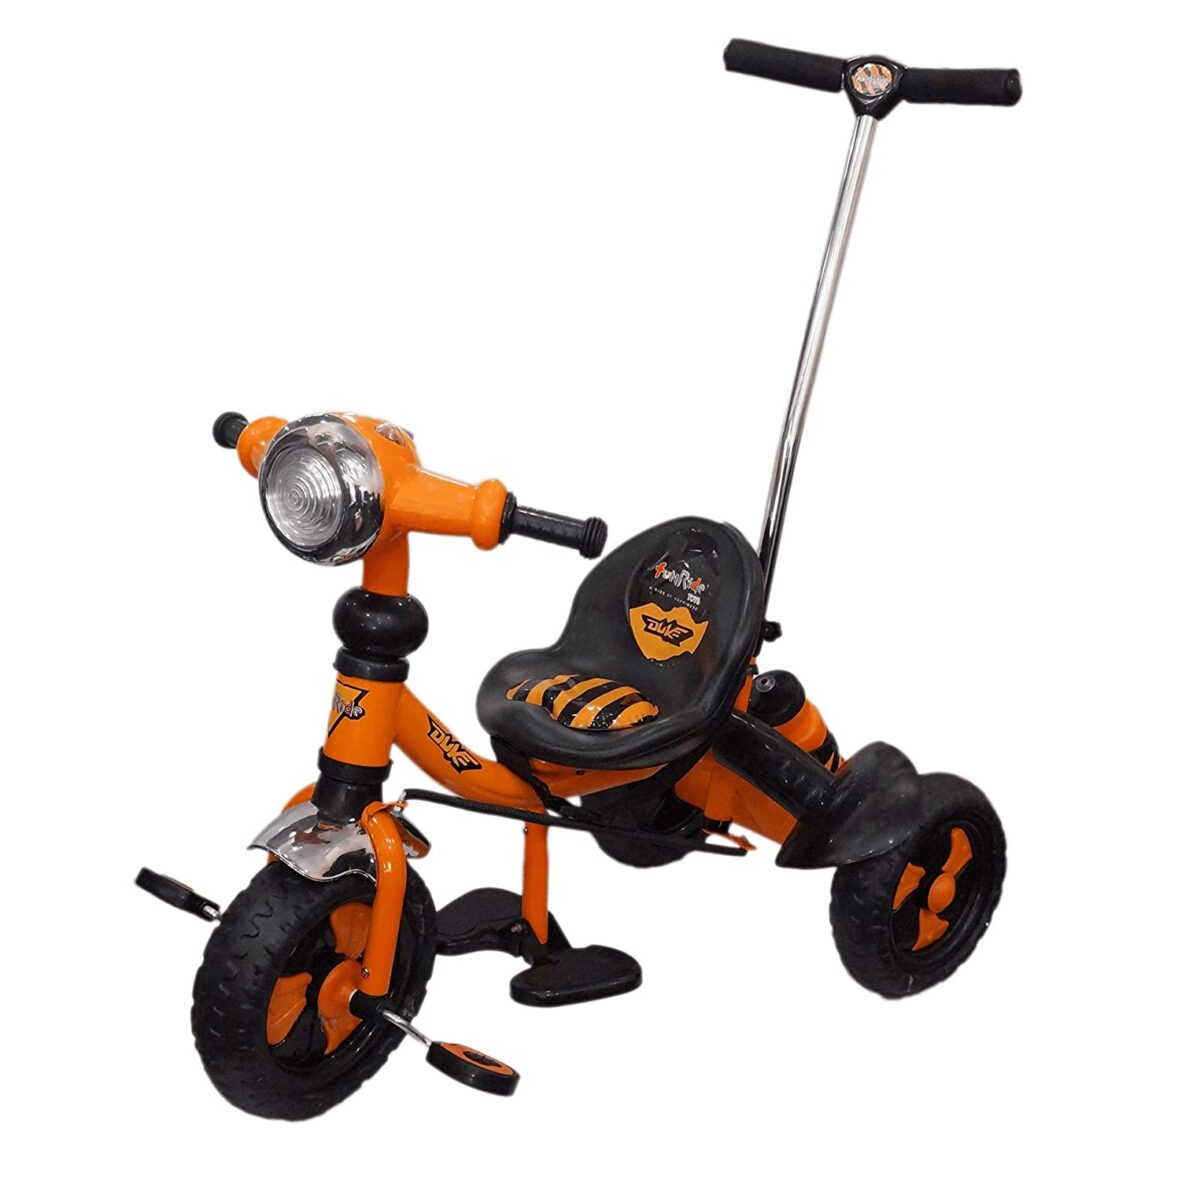 Fun Ride Tricycle for Kids with Music and Parental Control Handle – Duke Deluxe Baby Tri-Cycle – with Sipper and Bell for Boys and Girls (1 Year – 4 Years) (Orange)